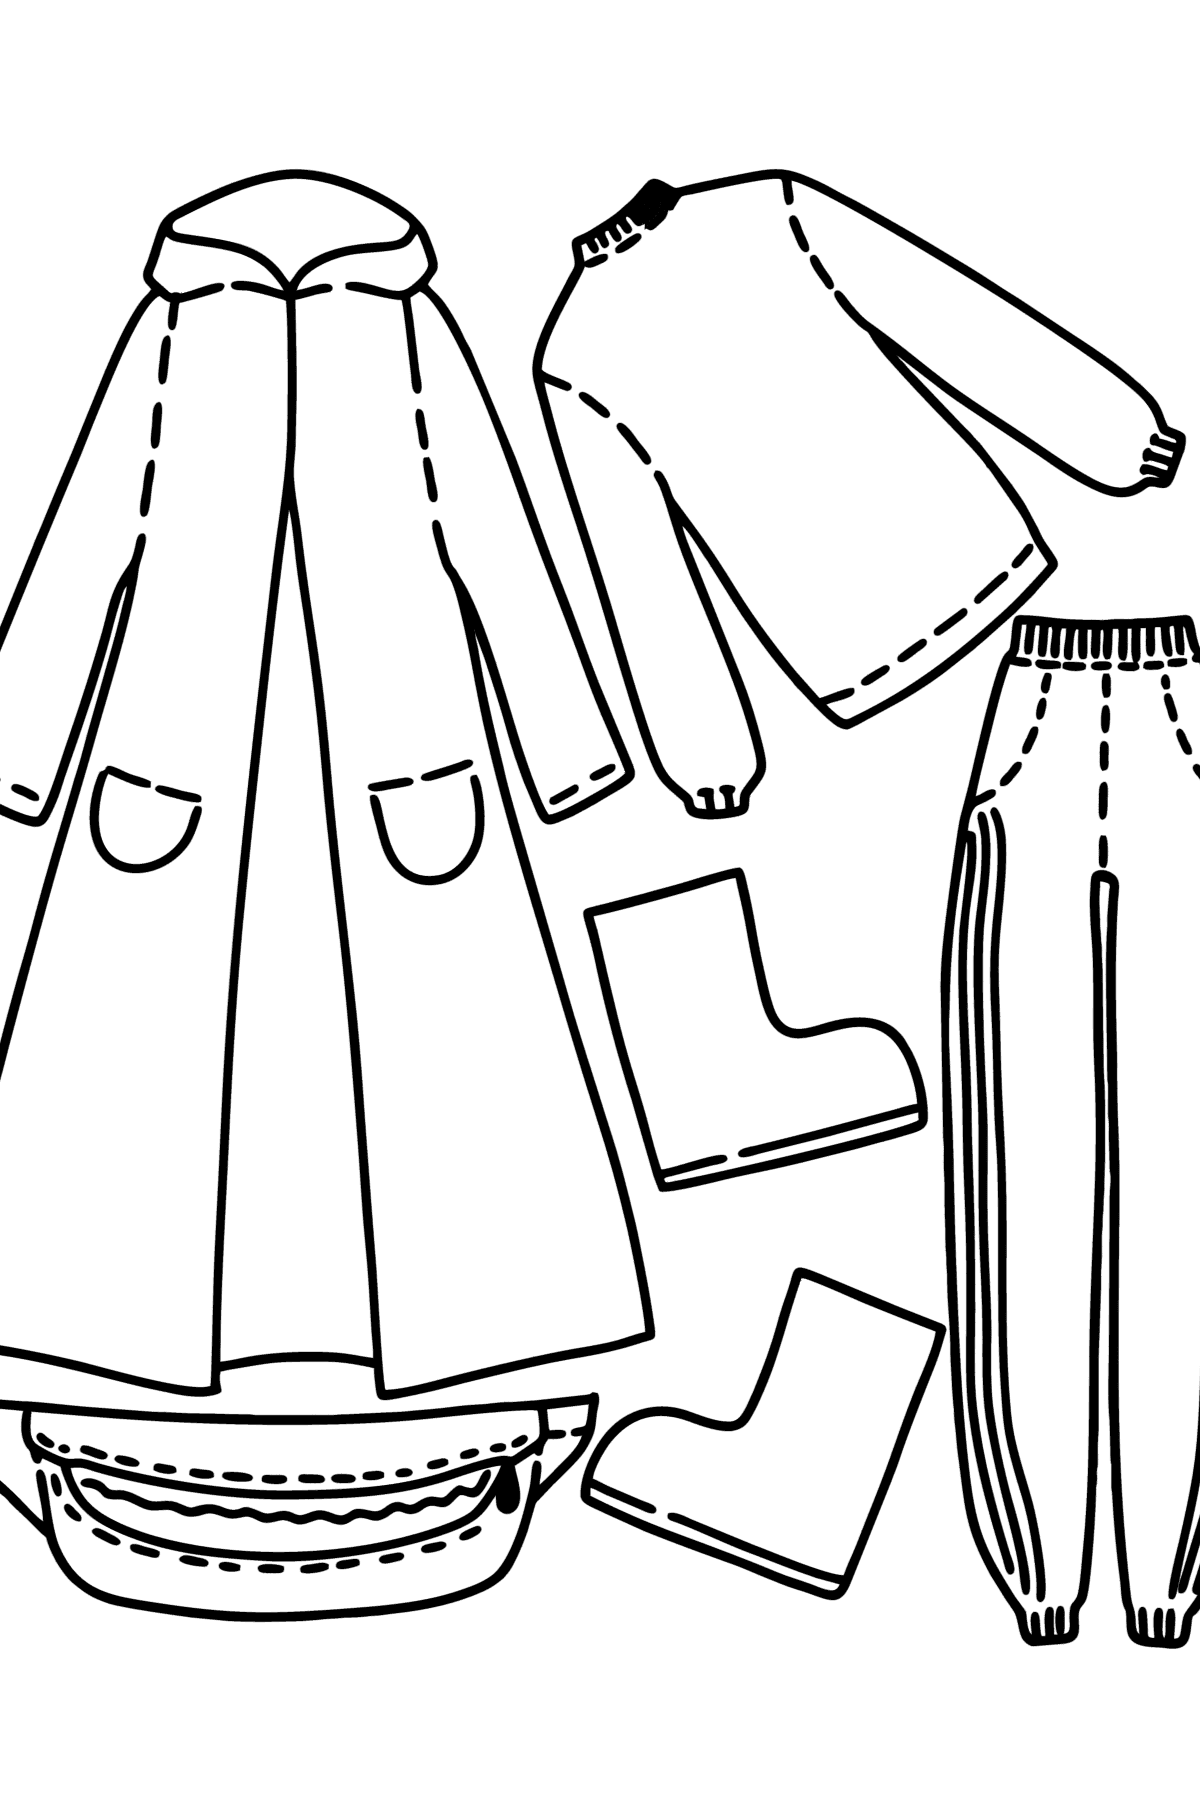 Autumn Clothes coloring page - Coloring Pages for Kids